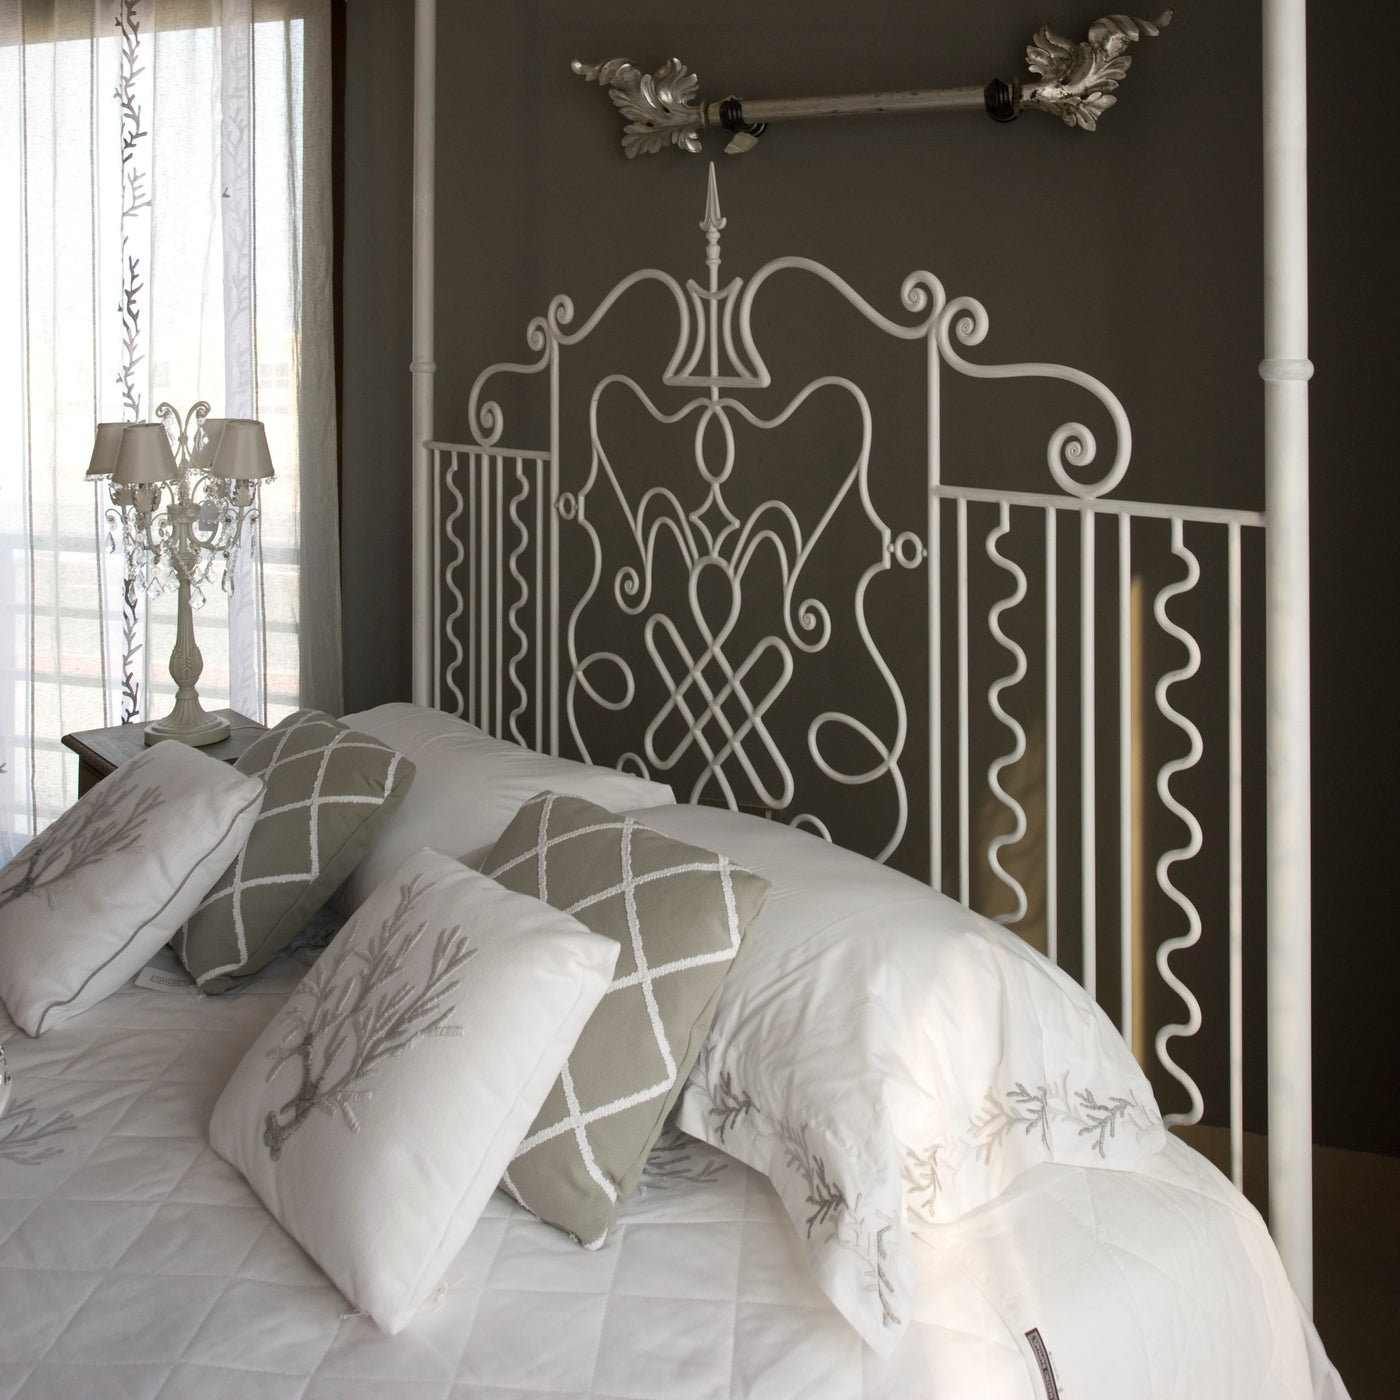 Luxurious king-size white canopy bed in a grey bedroom. Made of hand forged metal.